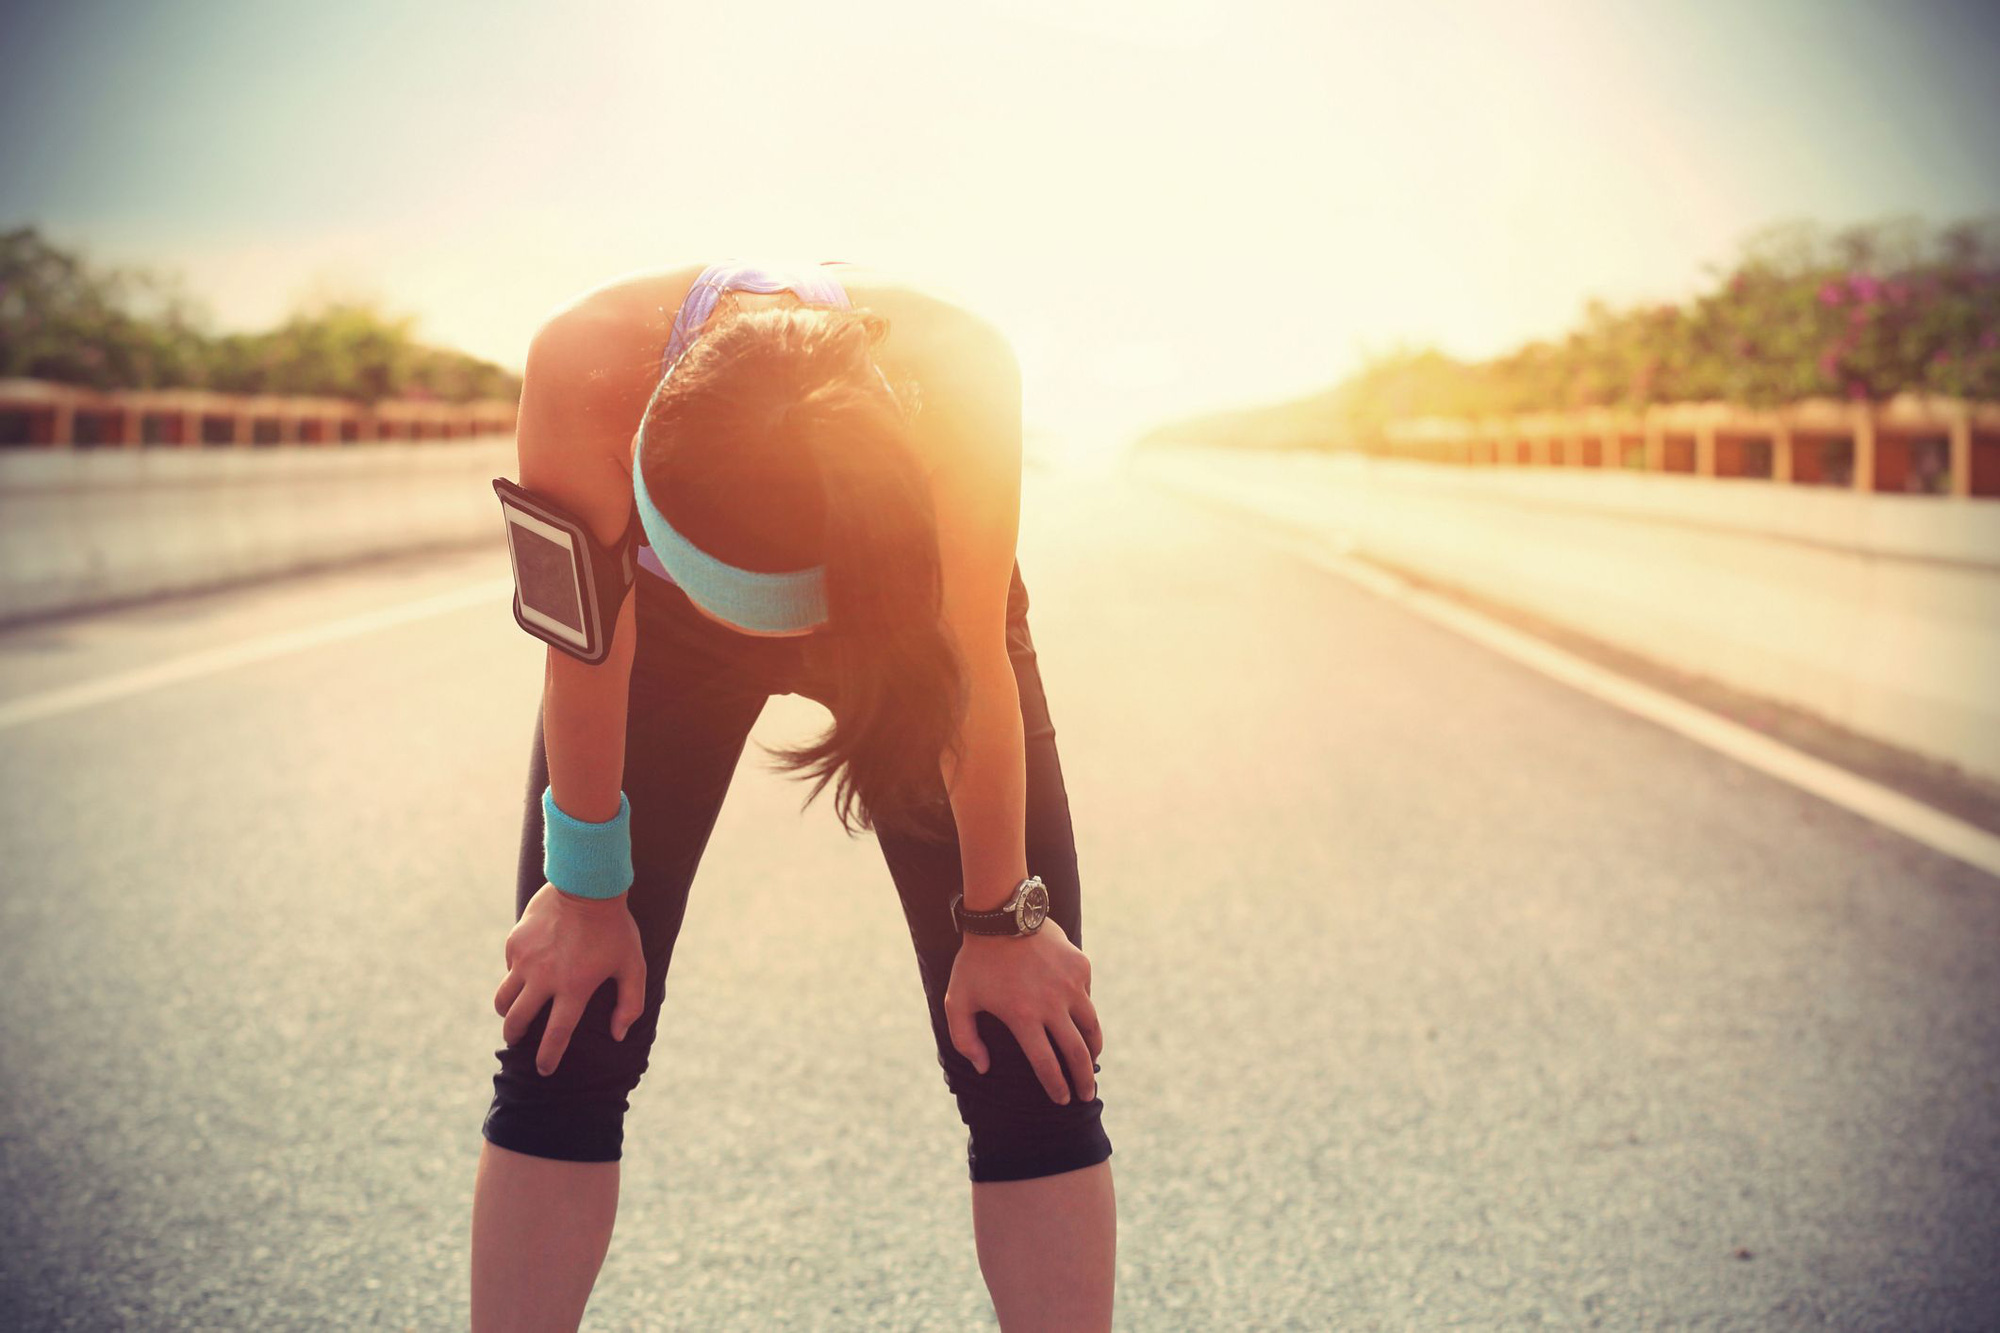 tired-woman-runner-taking-a-rest-after-running-hard-royalty-free-image-477815606-1566669912.jpeg